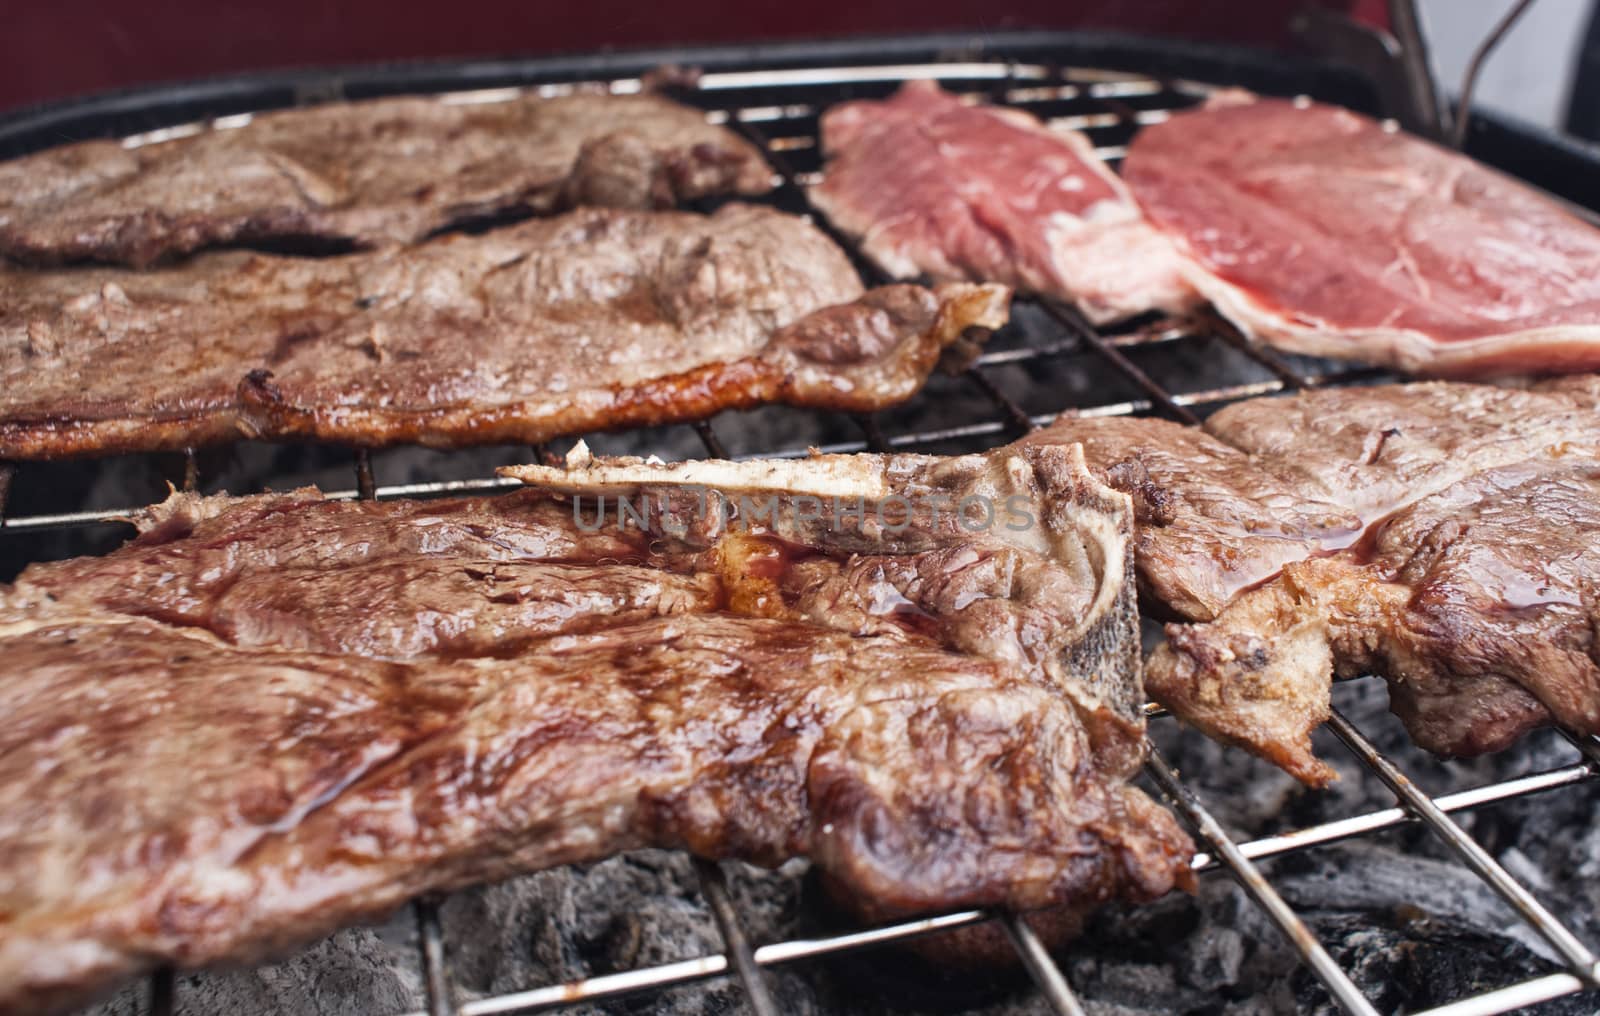 Photograph of some grilled meat juicy steaks